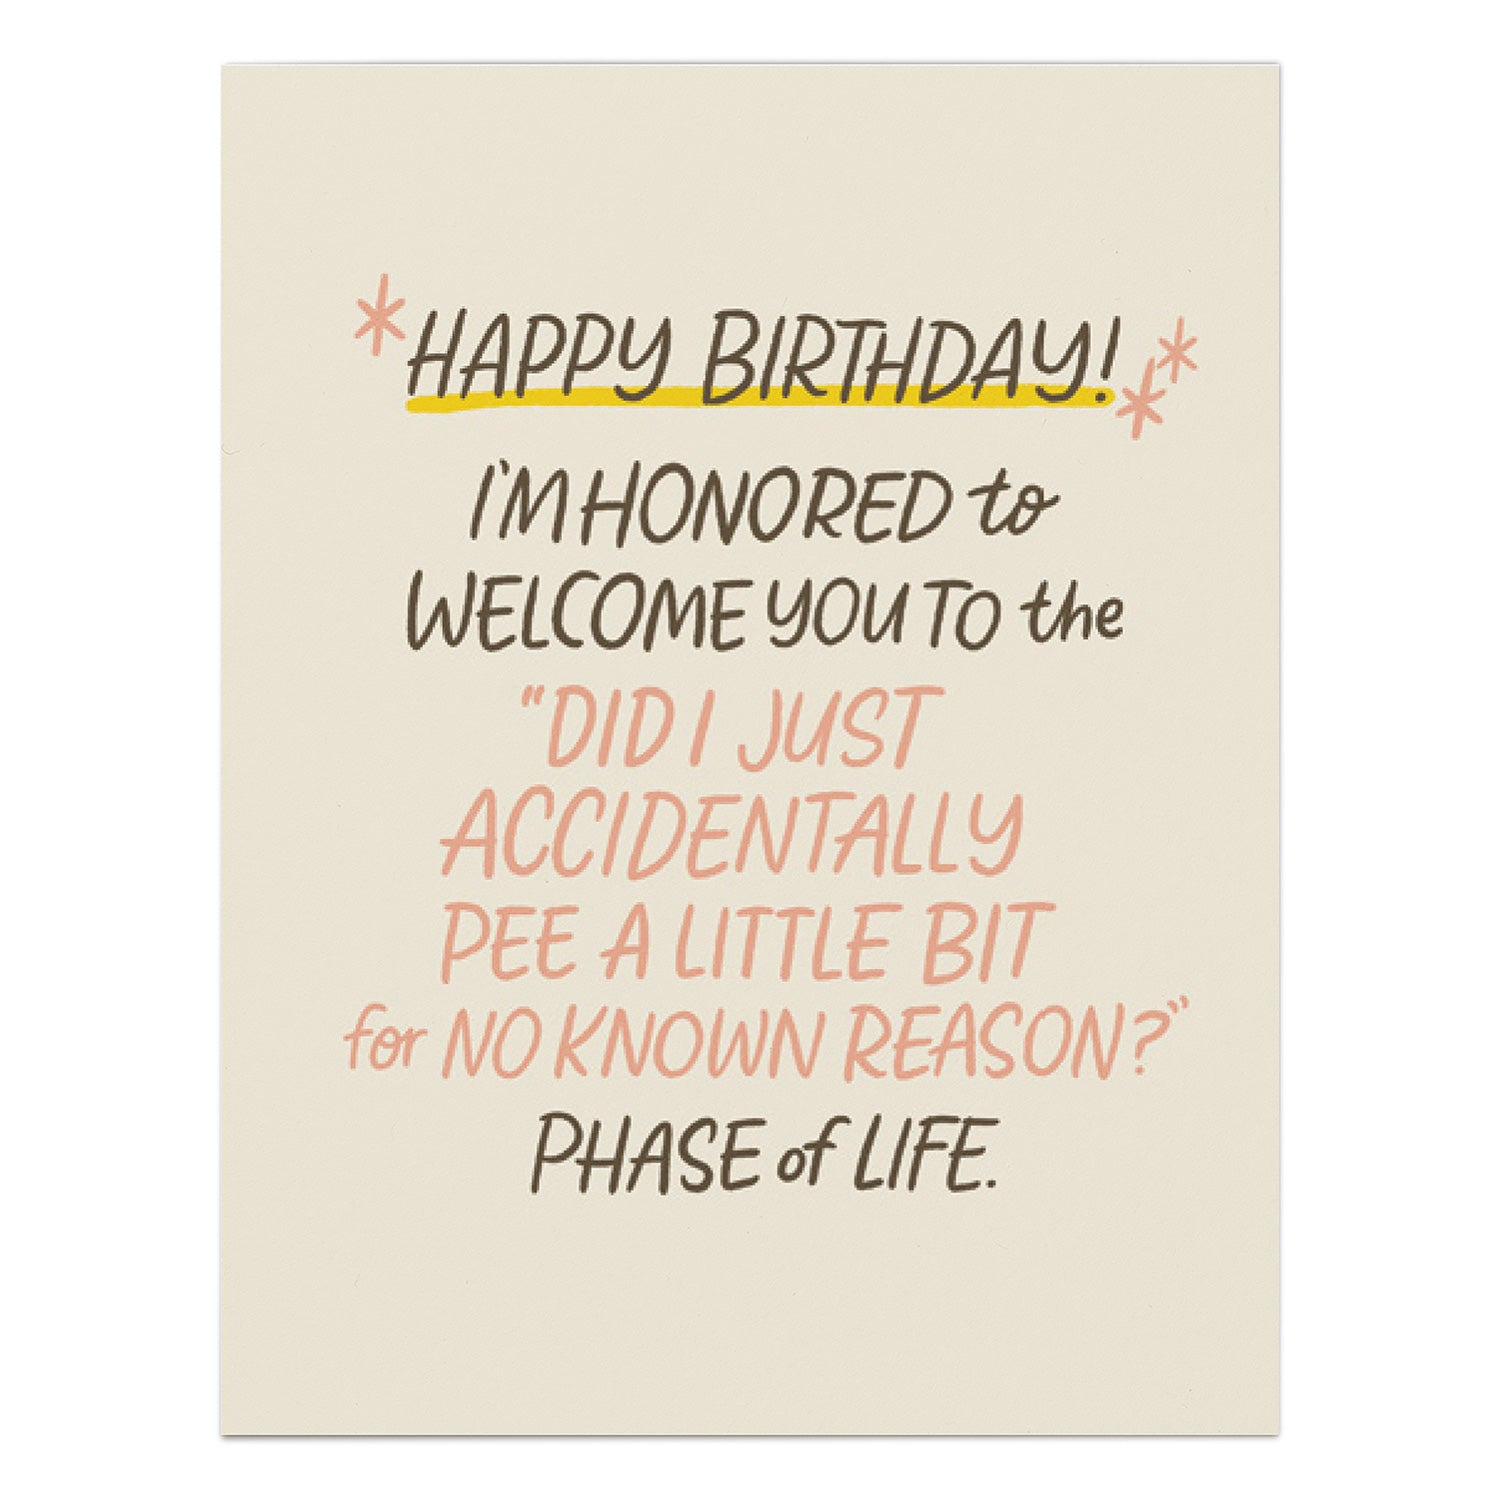 Accidentally Pee Years Old Birthday Card